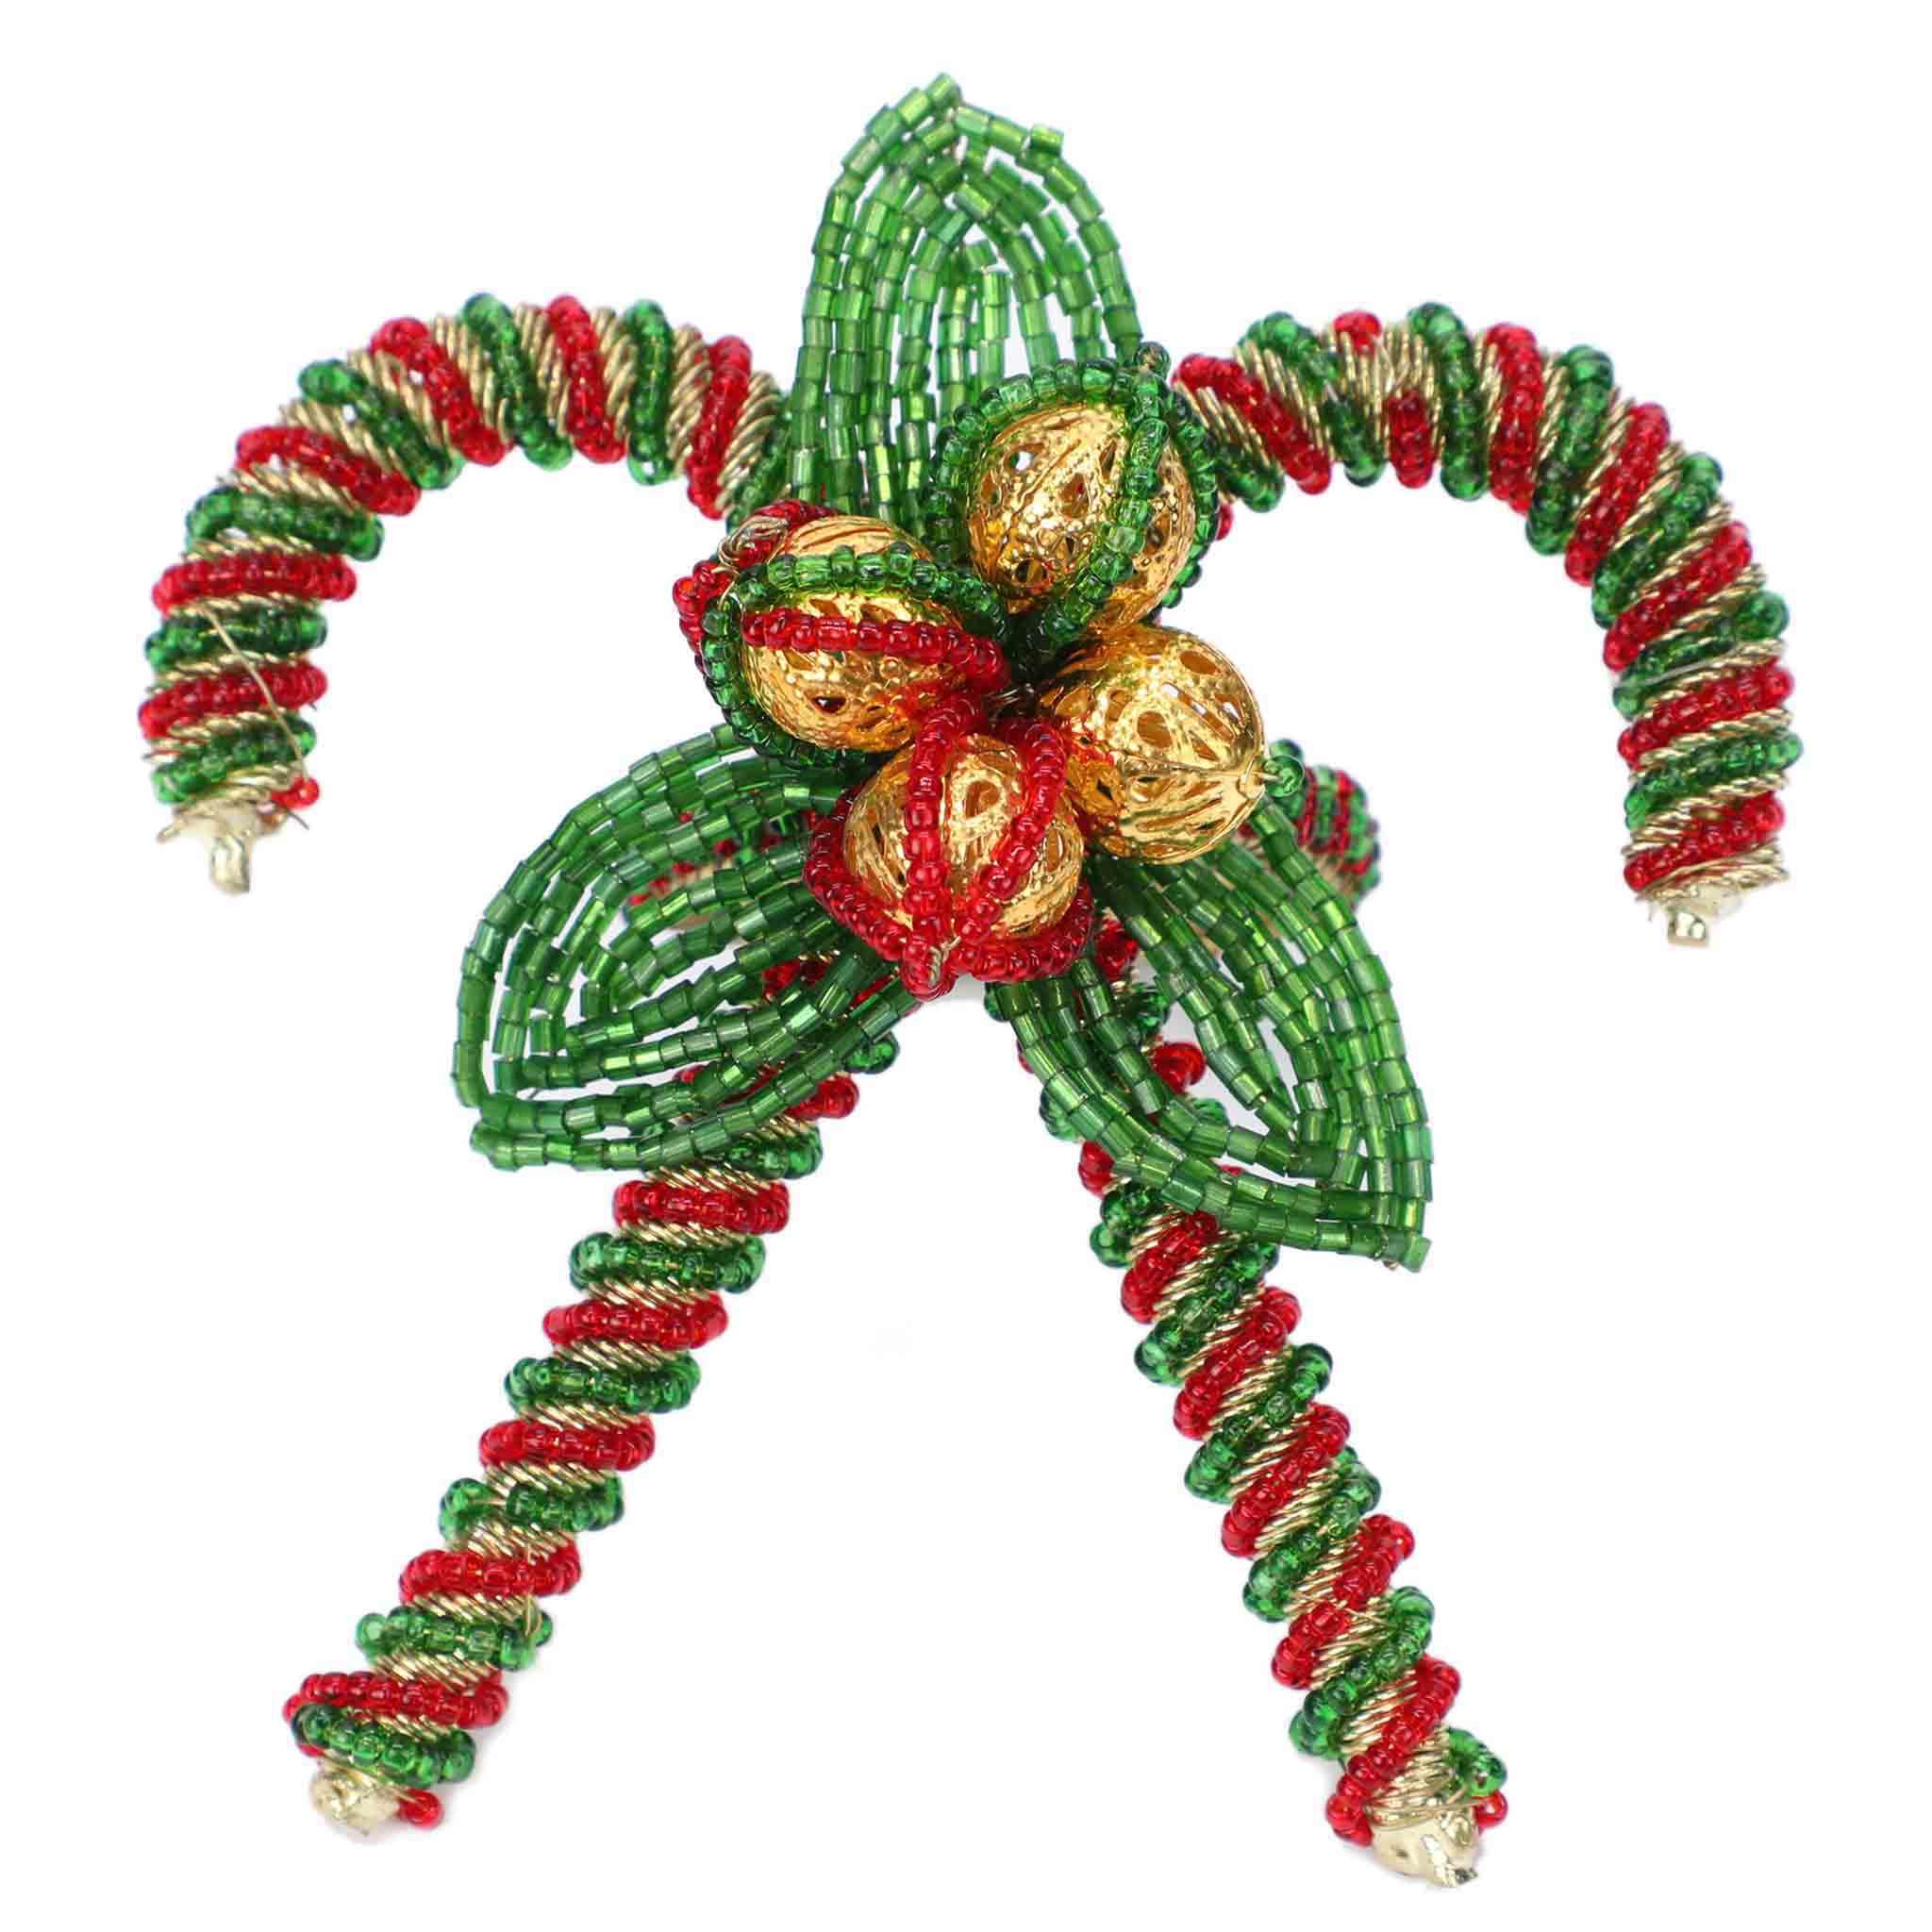 Yes We Cane Napkin Ring<br>Color: Green, Red & Gold<br>Size: 3.5"x4"<br>Set of 4 - Trunkin' USA